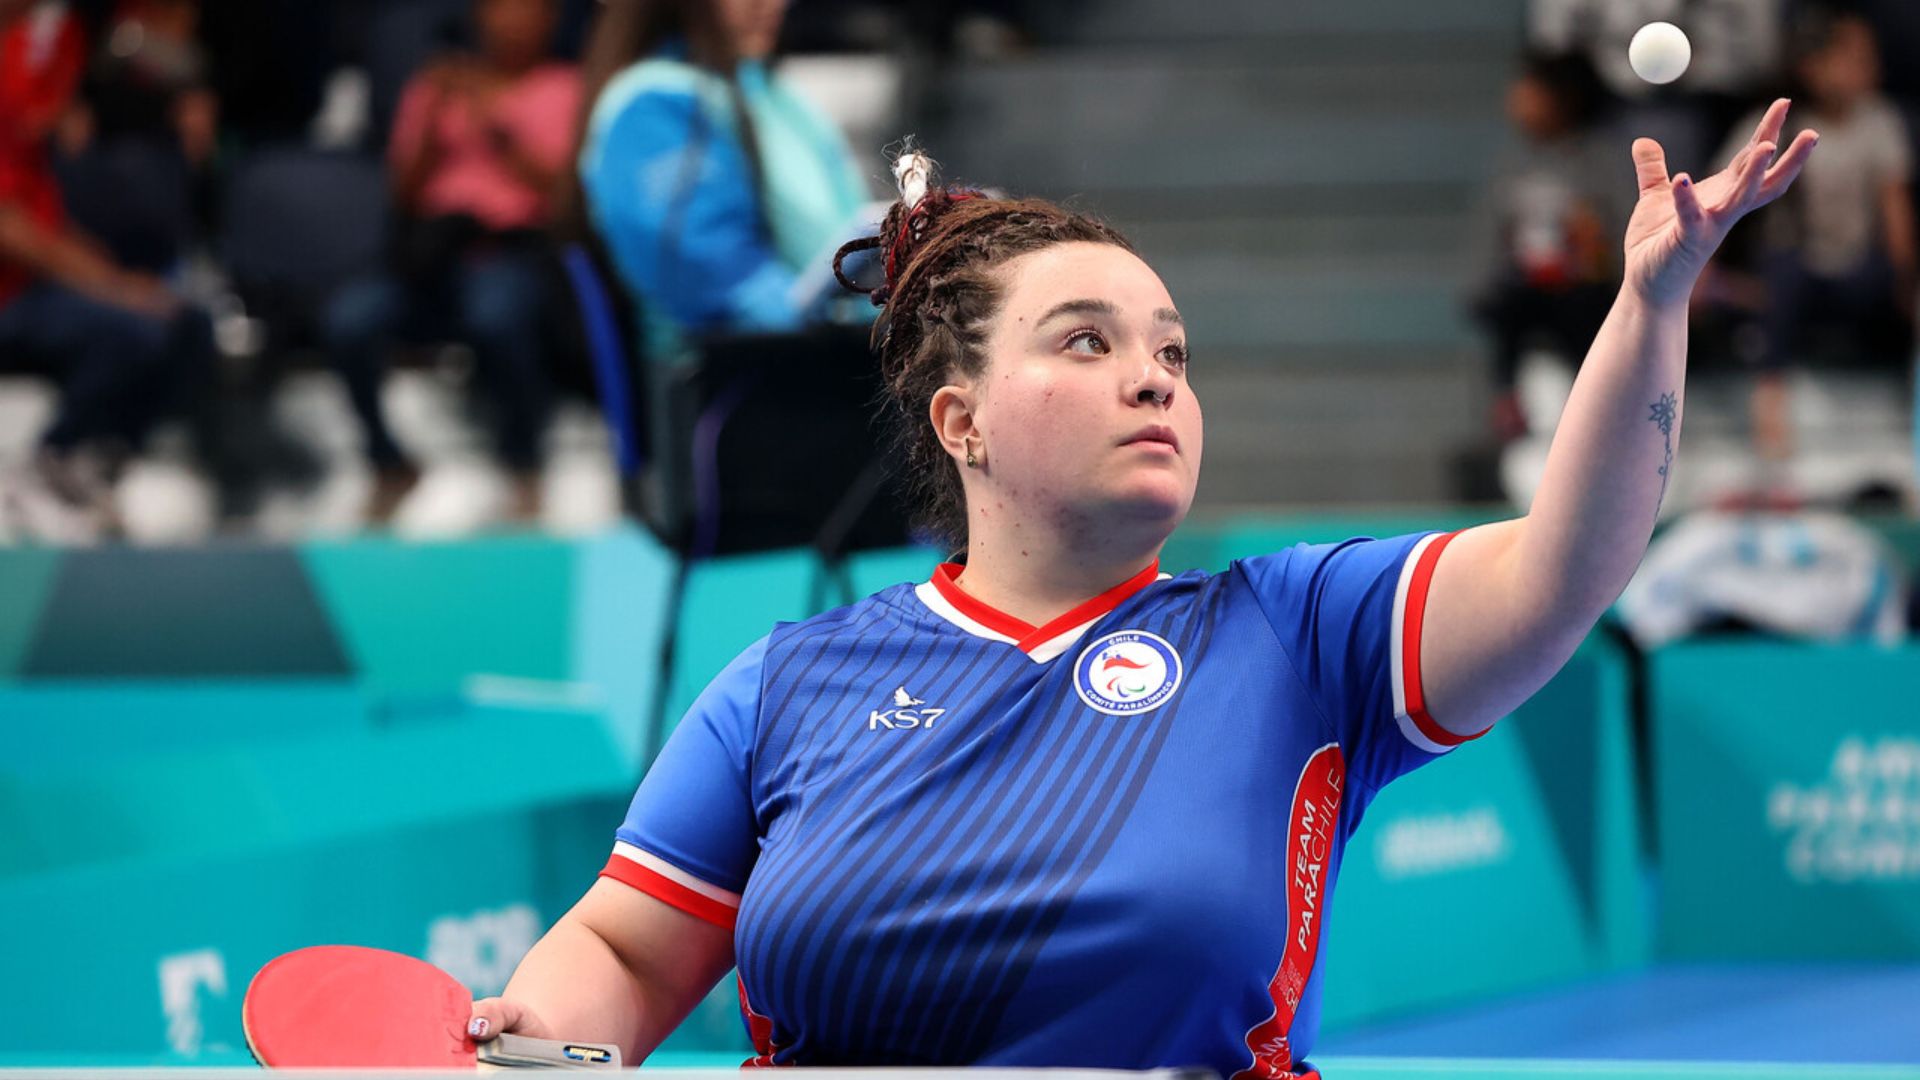 Tamara Leonelli Secures the Third Medal for Chile in Para Table Tennis